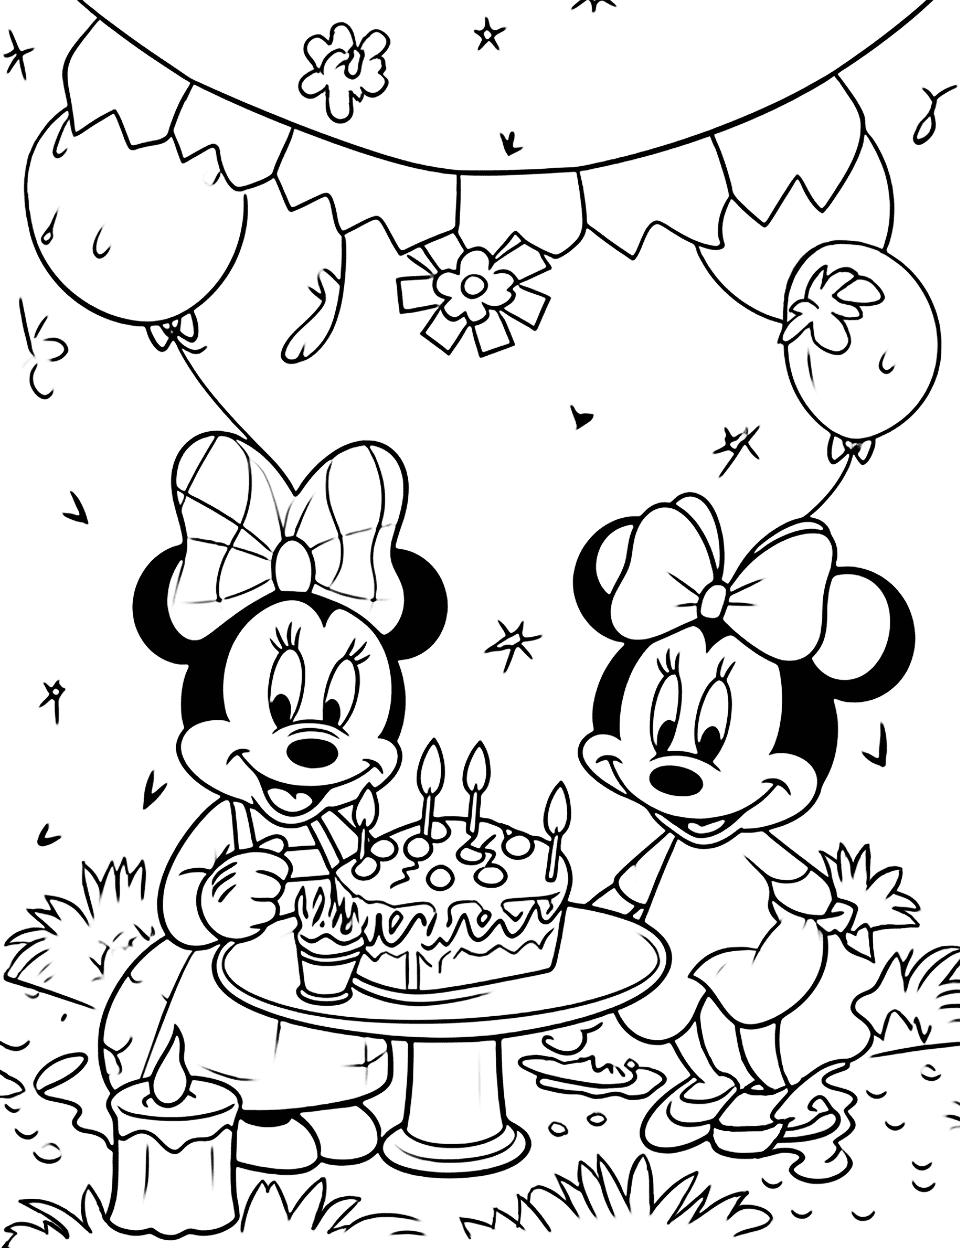 Minnie Mouse's Birthday Picnic Happy Coloring Page - Minnie Mouse enjoying a birthday picnic.